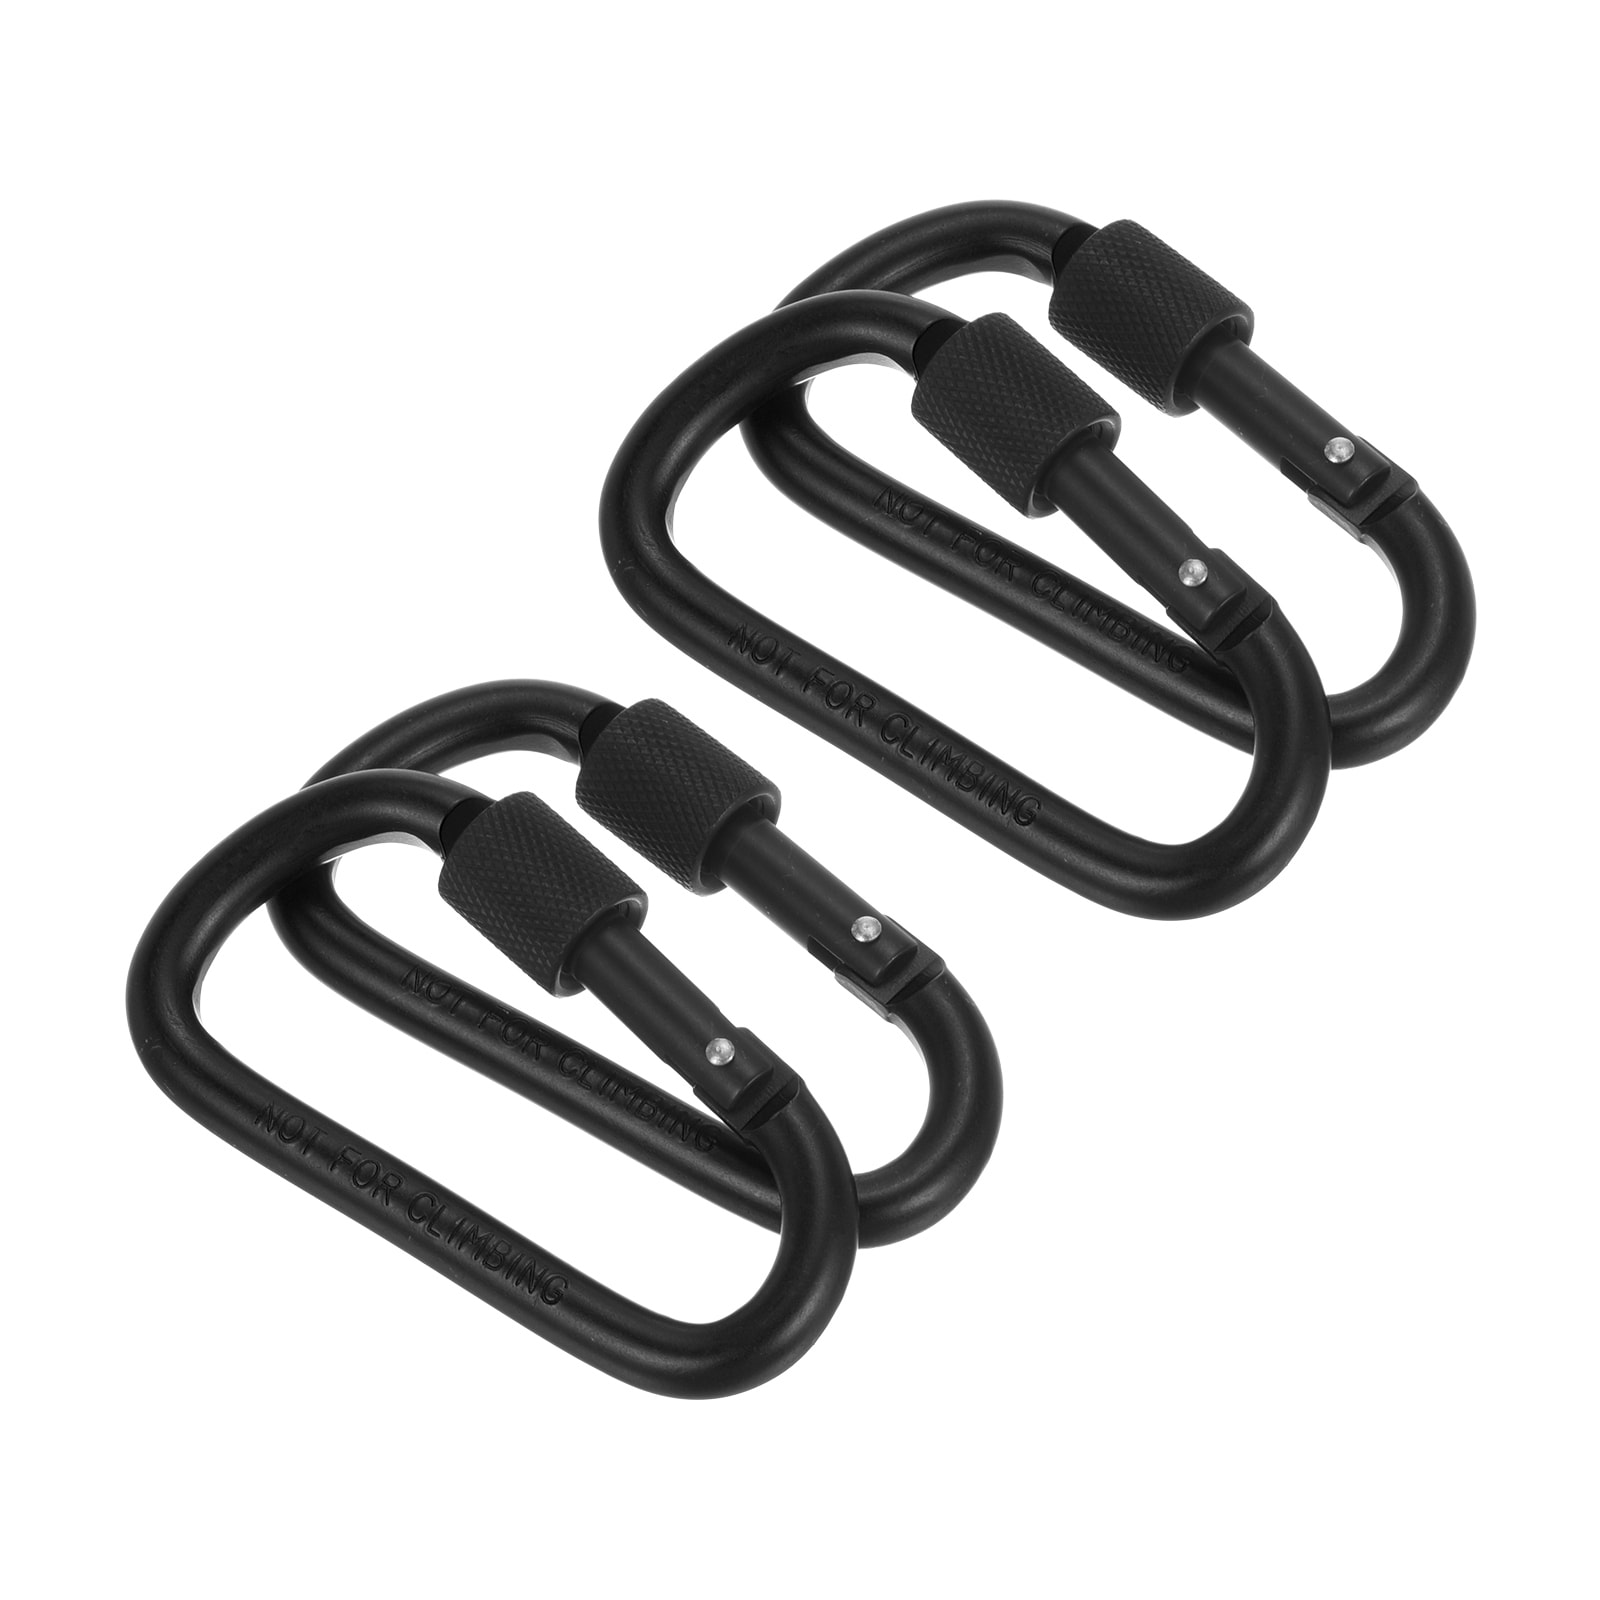 Carabiner Clip Aluminum D-Ring Spring Loaded Gate Small Keychain